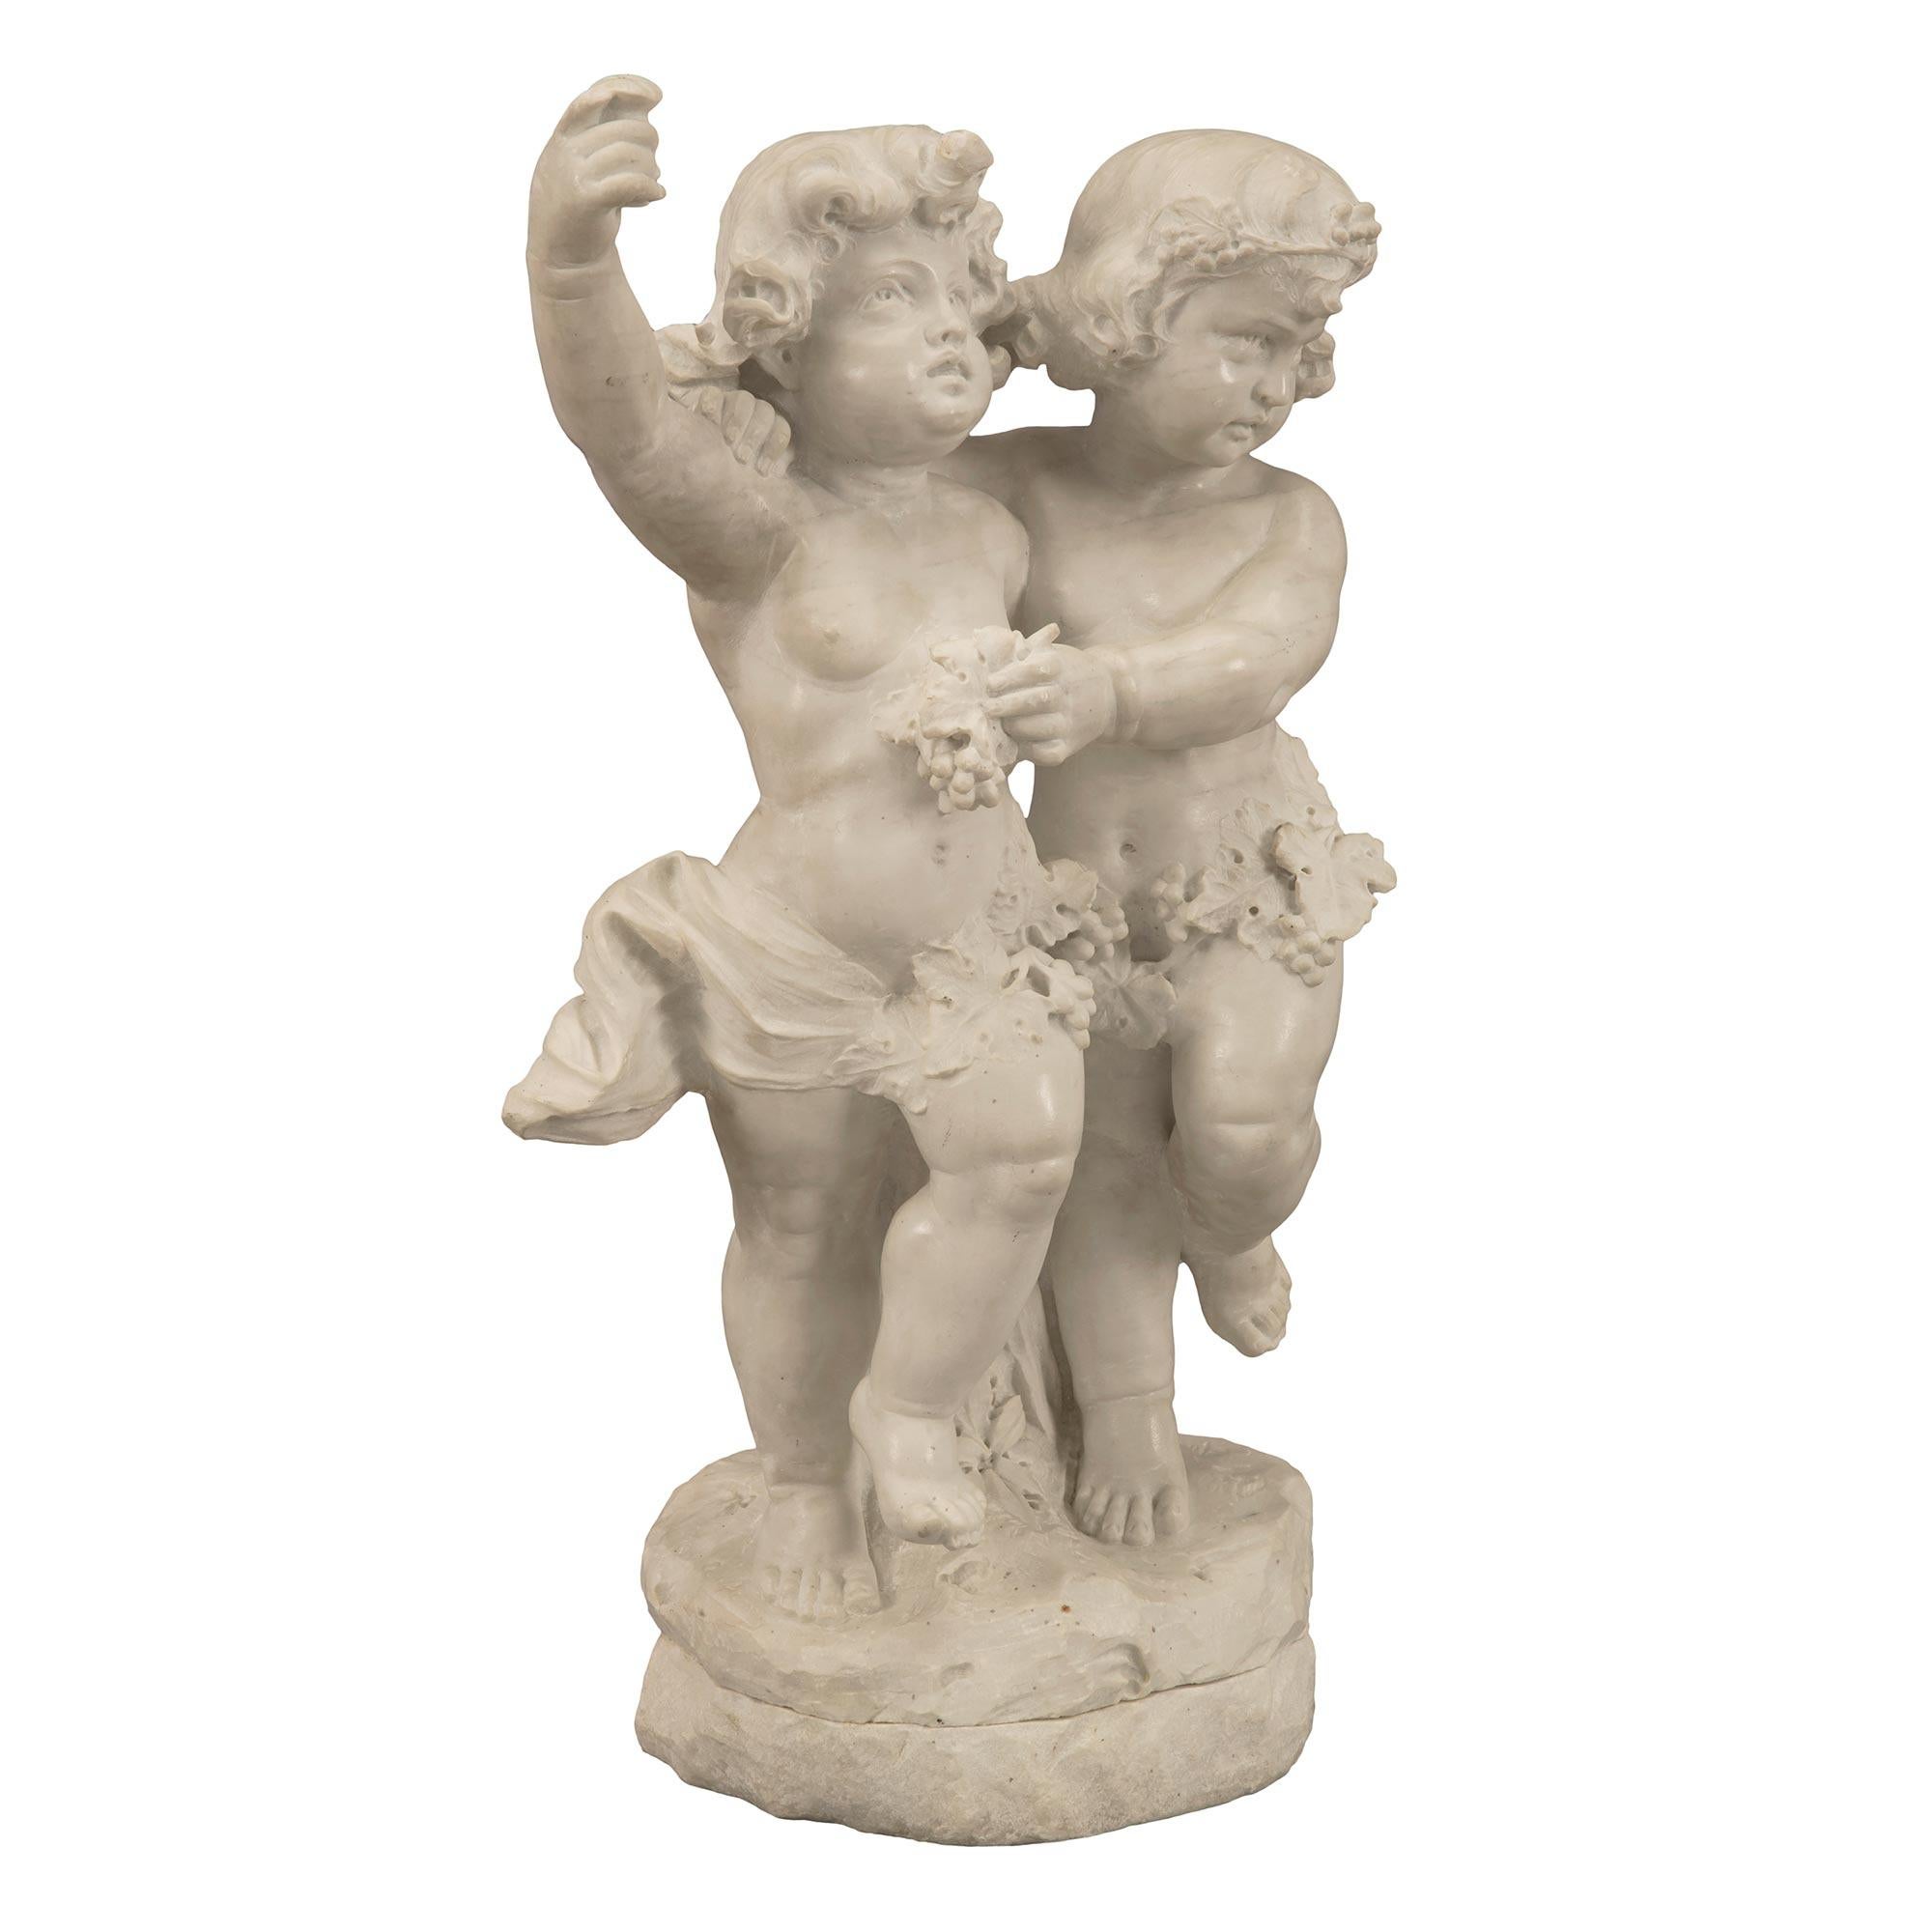 A charming and high quality Italian 19th century white Carrara marble statue of two children playing. The statue is raised by a circular base with a ground like design. Above are Bacchus and possibly Ariadne playfully dancing. Behind them is a